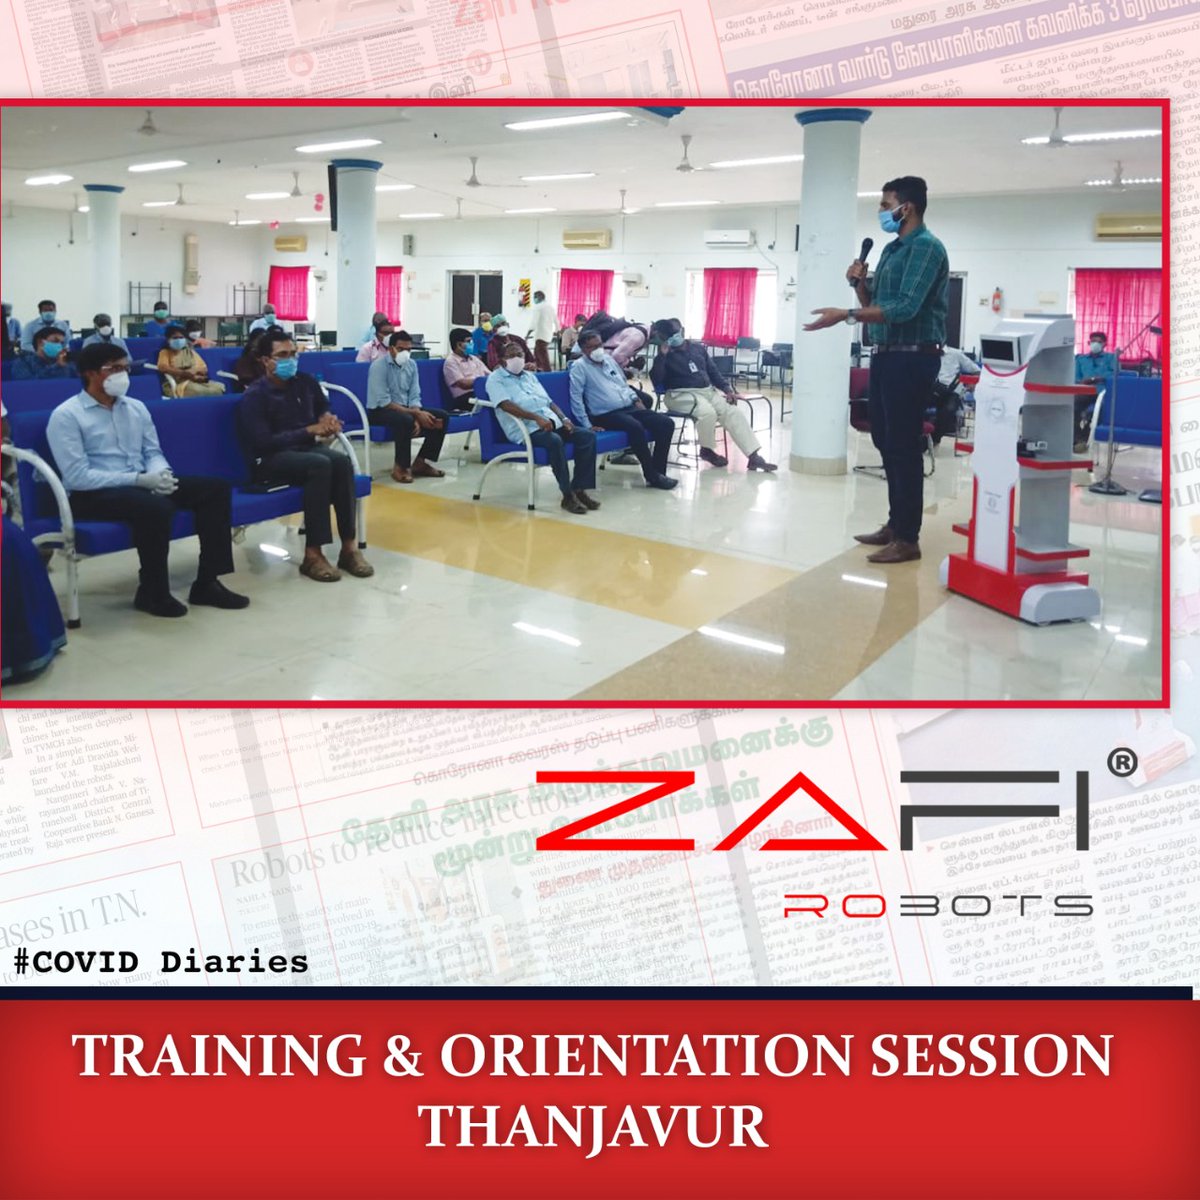 #coviddiaries   We conducted a Orientation and training program on #Zafi in Thanjavur Medical College

#COVID19 #Coronafree #TMC